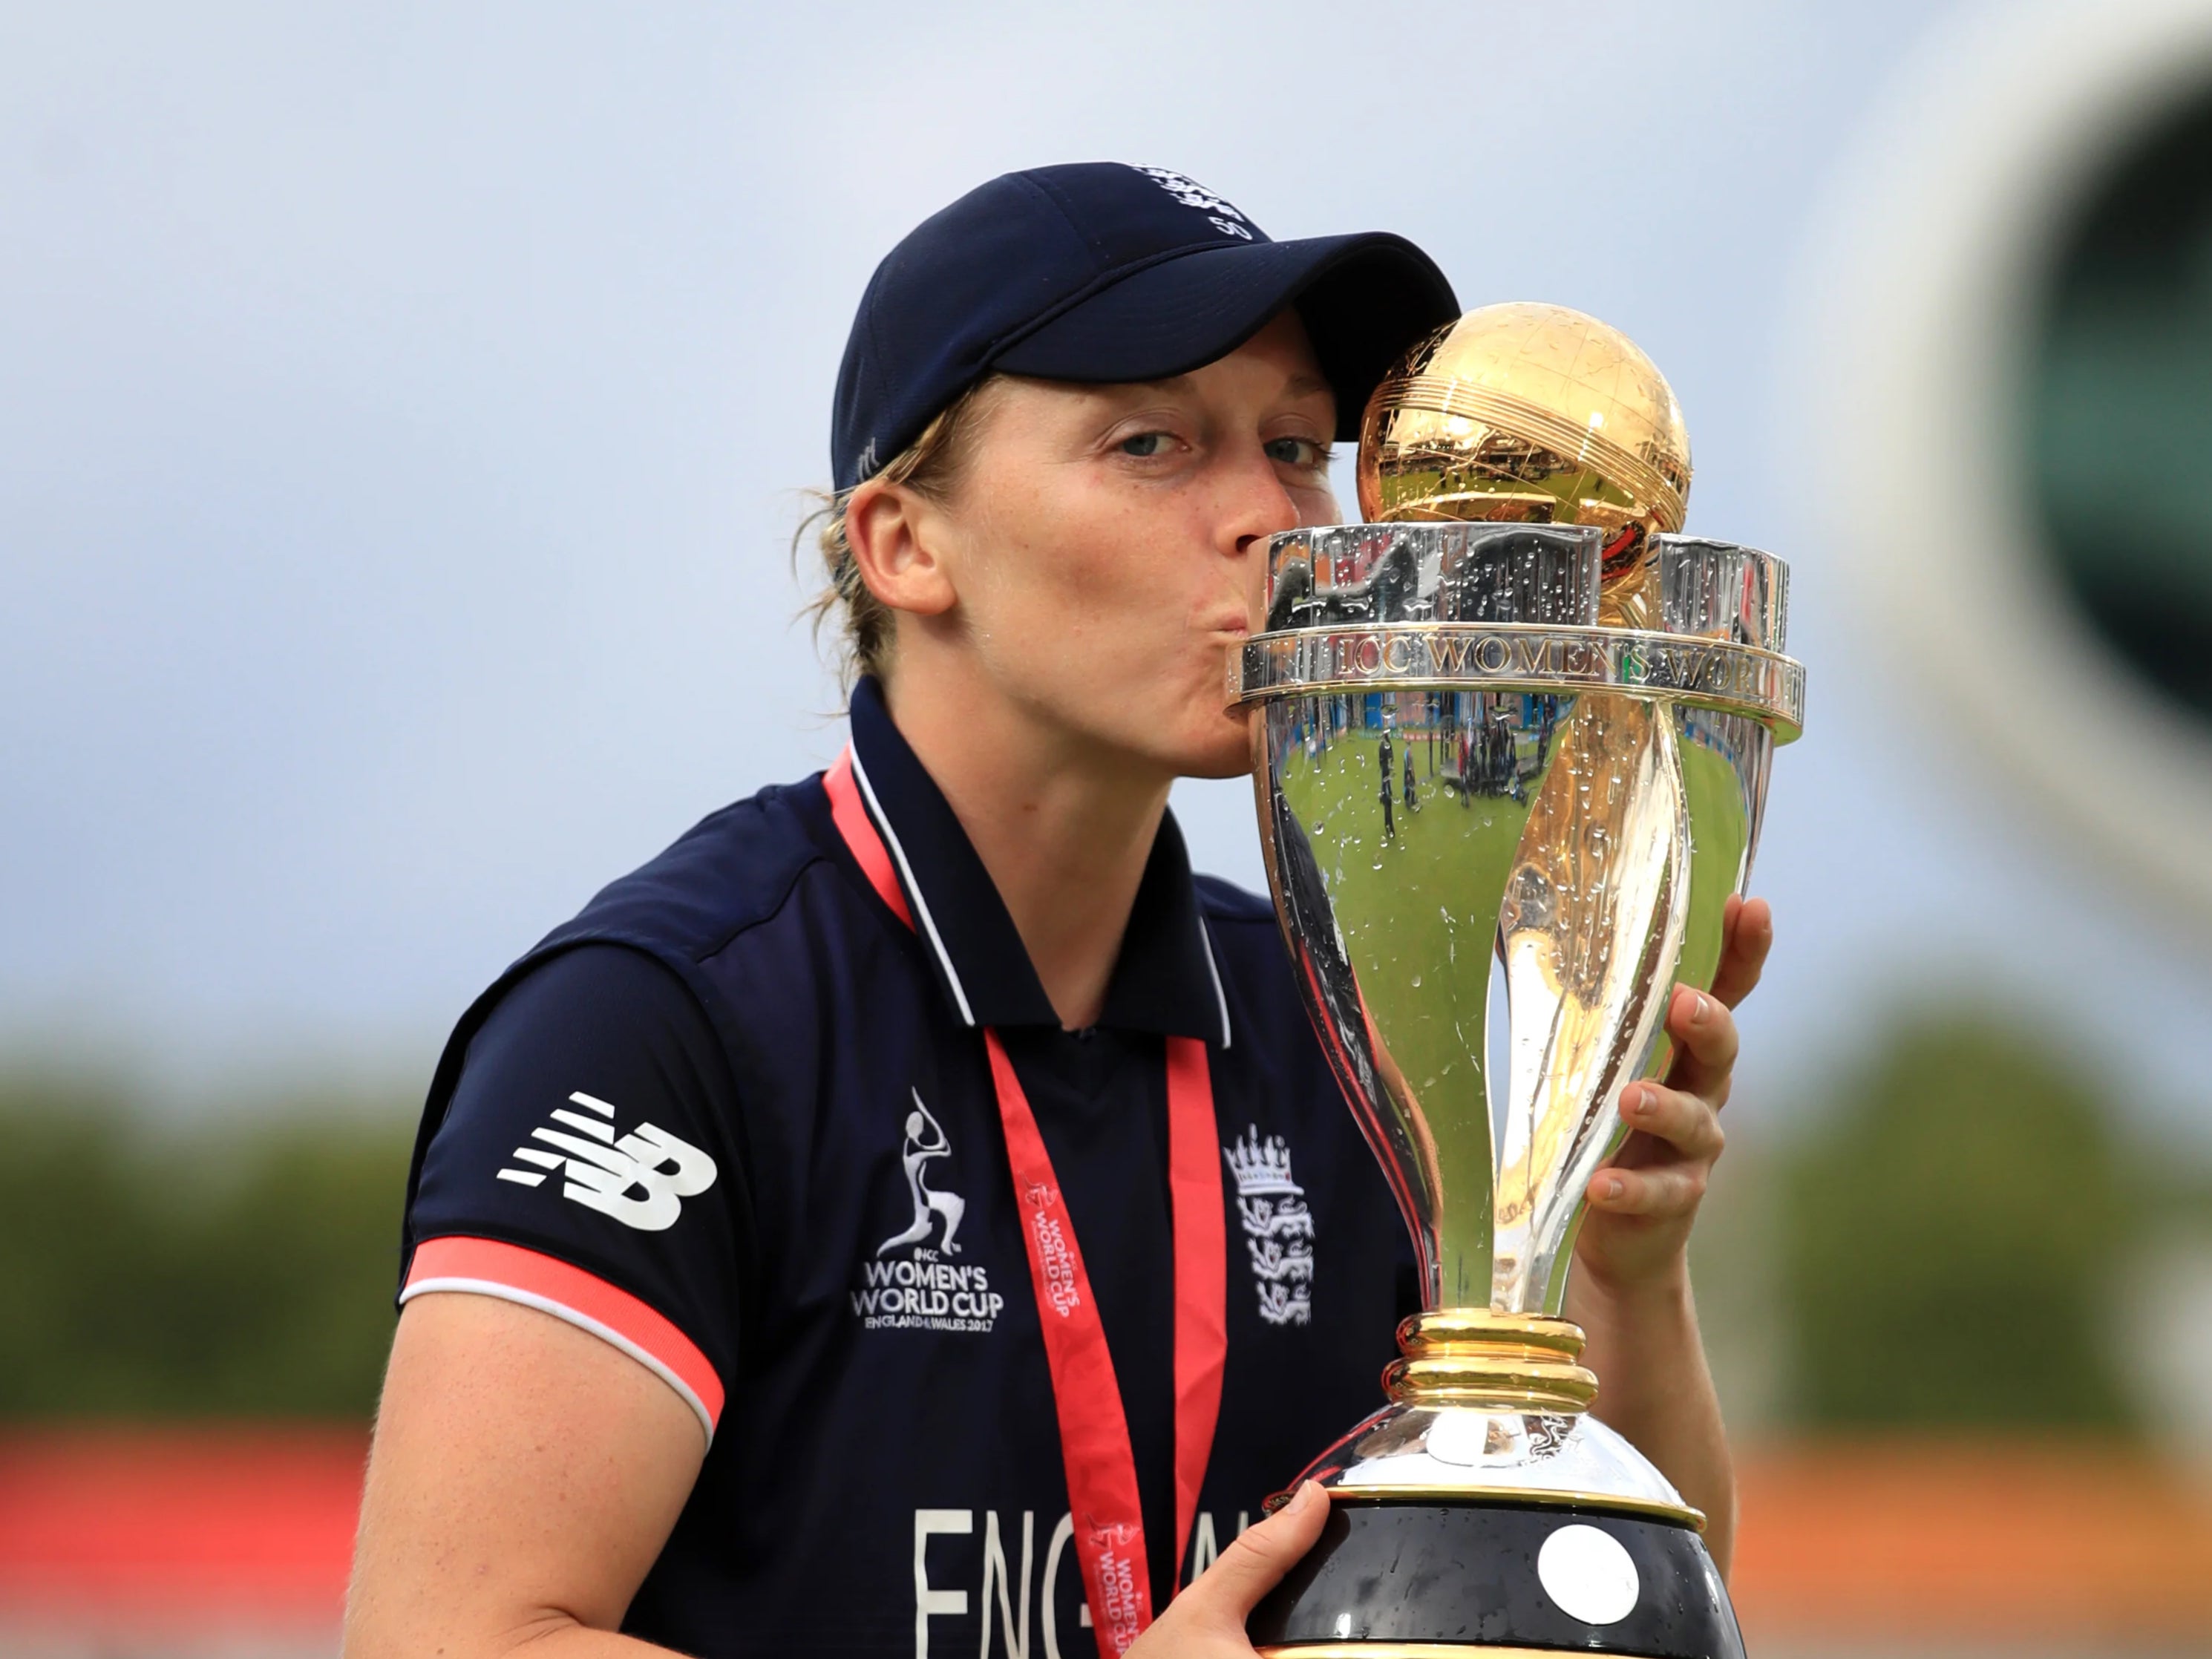 England won the Women’s World Cup – the last time a women’s tournament was hosted in the country